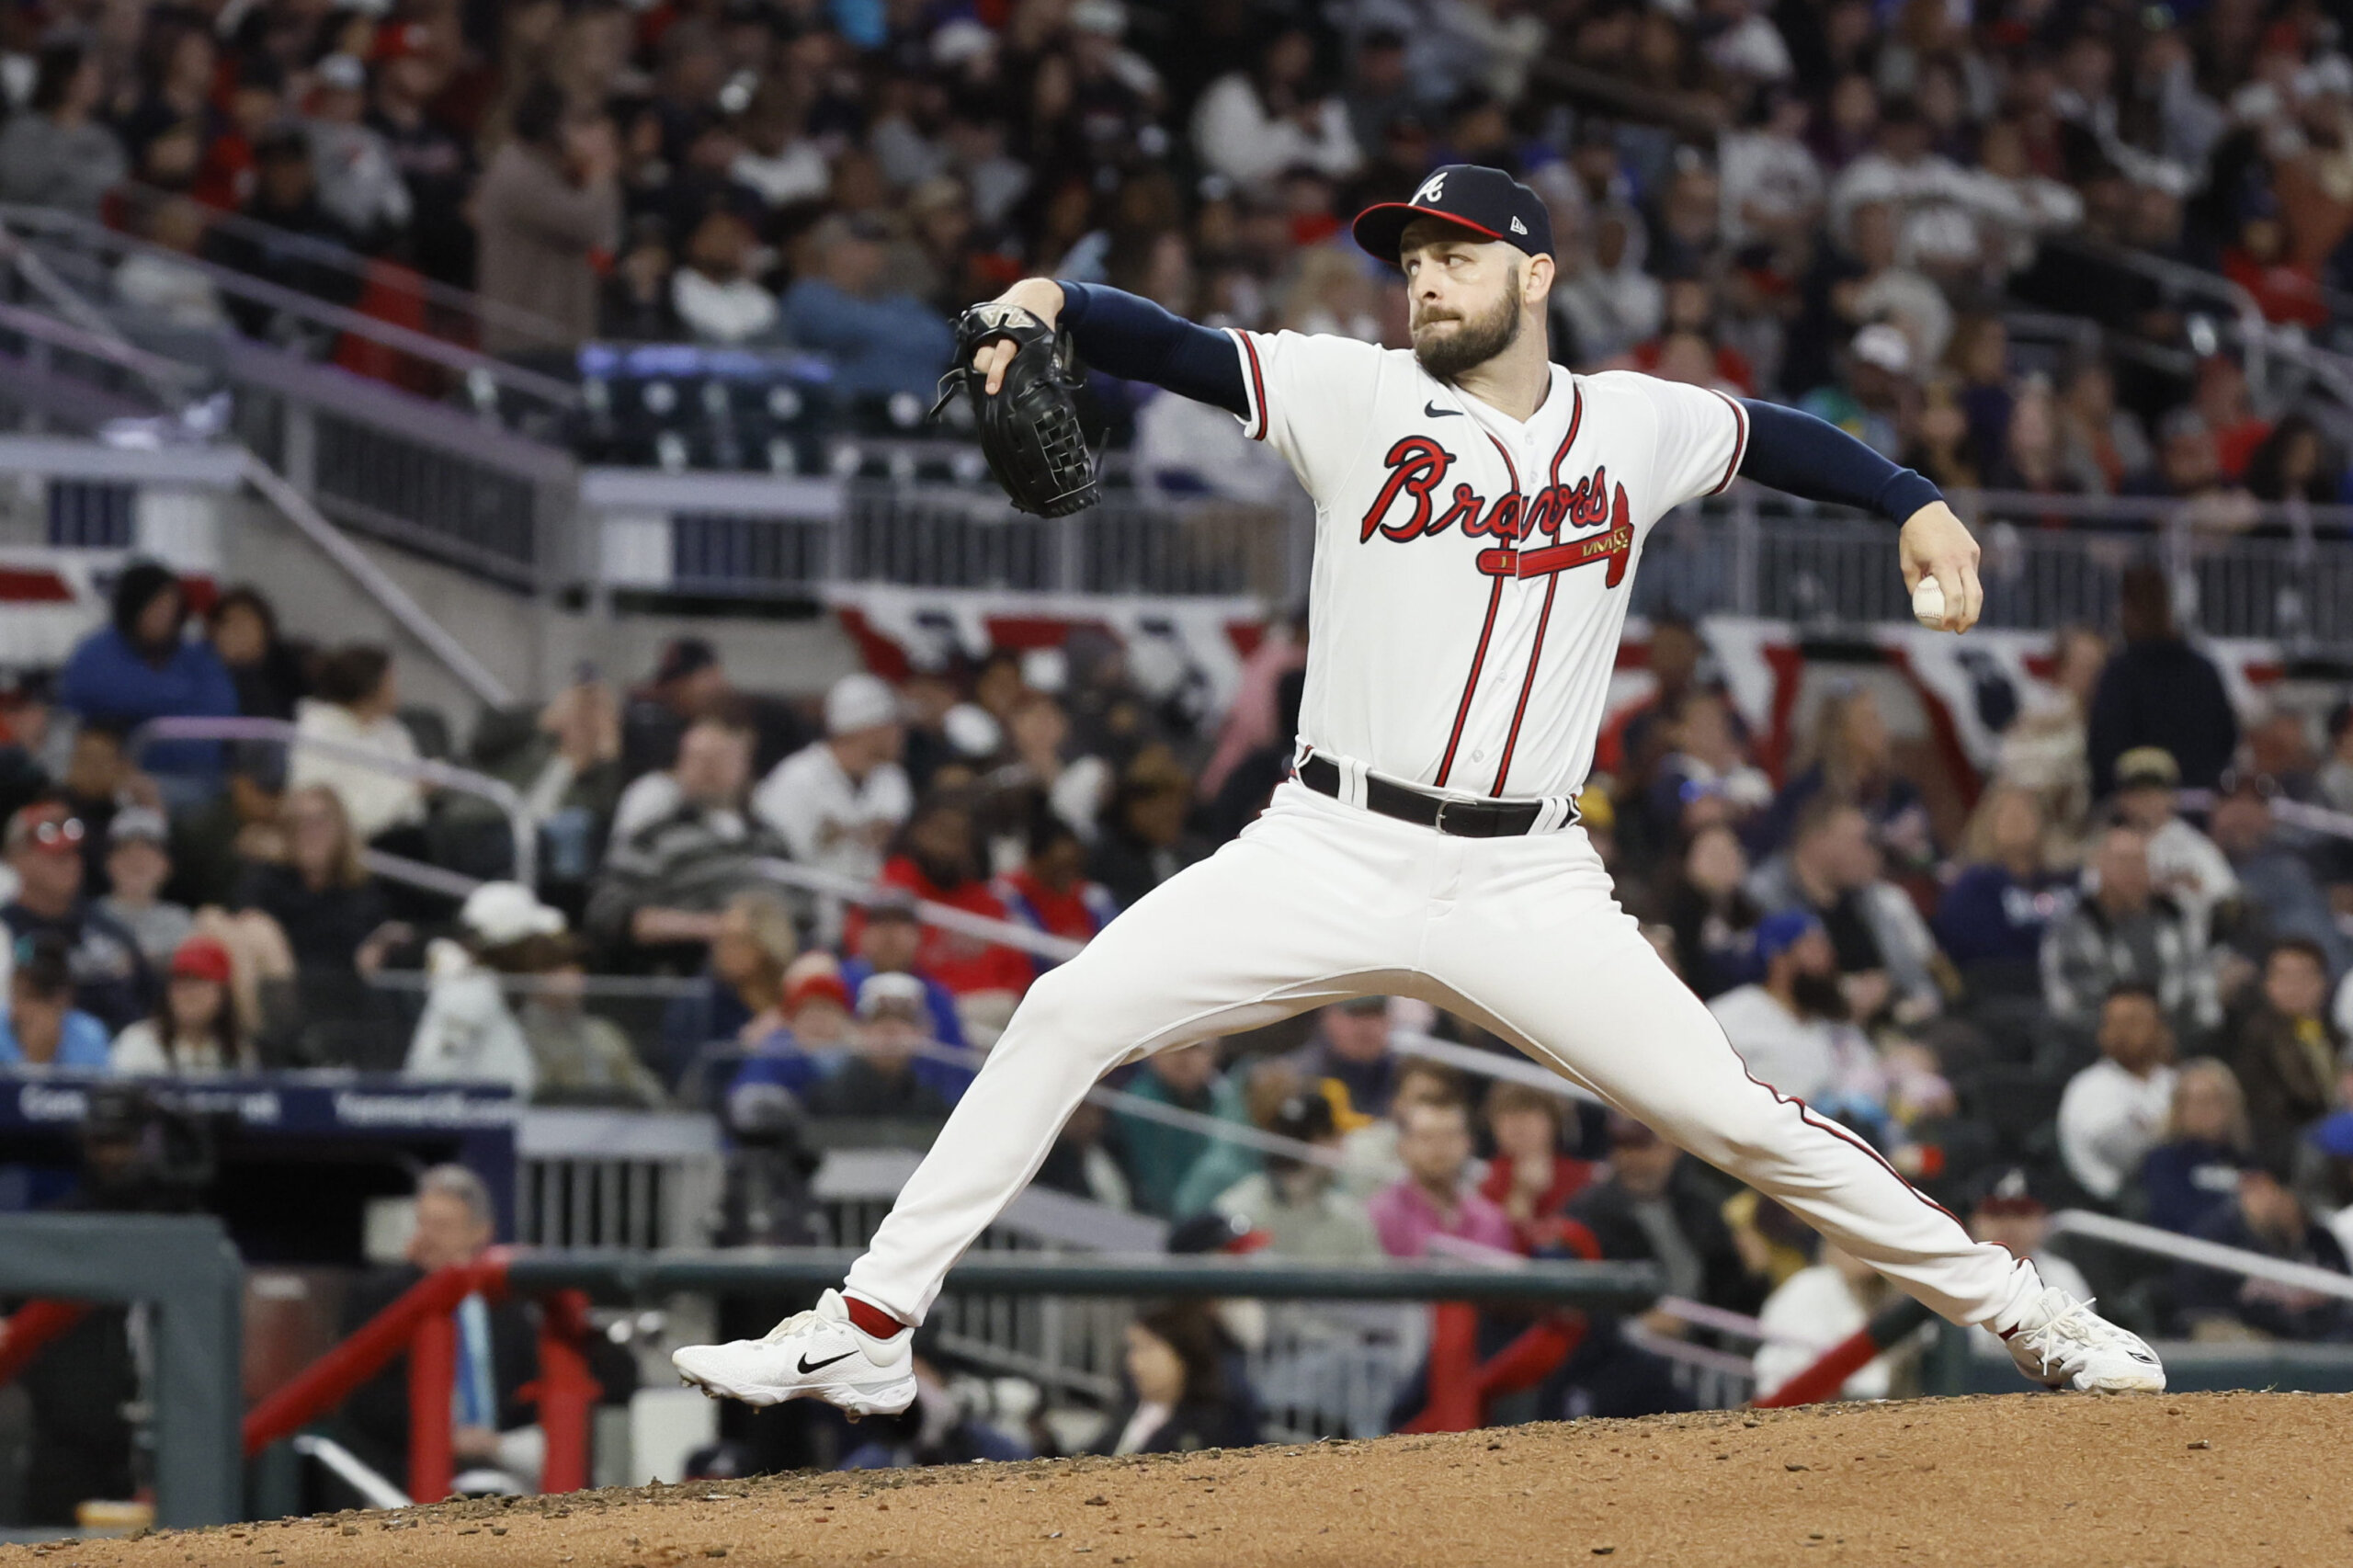 Atlanta Braves relief pitcher Lucas Luetge (63) delivers during the fifth inning against San Diego Padres batter at Truist Park on Sunday, April 9, 2023.